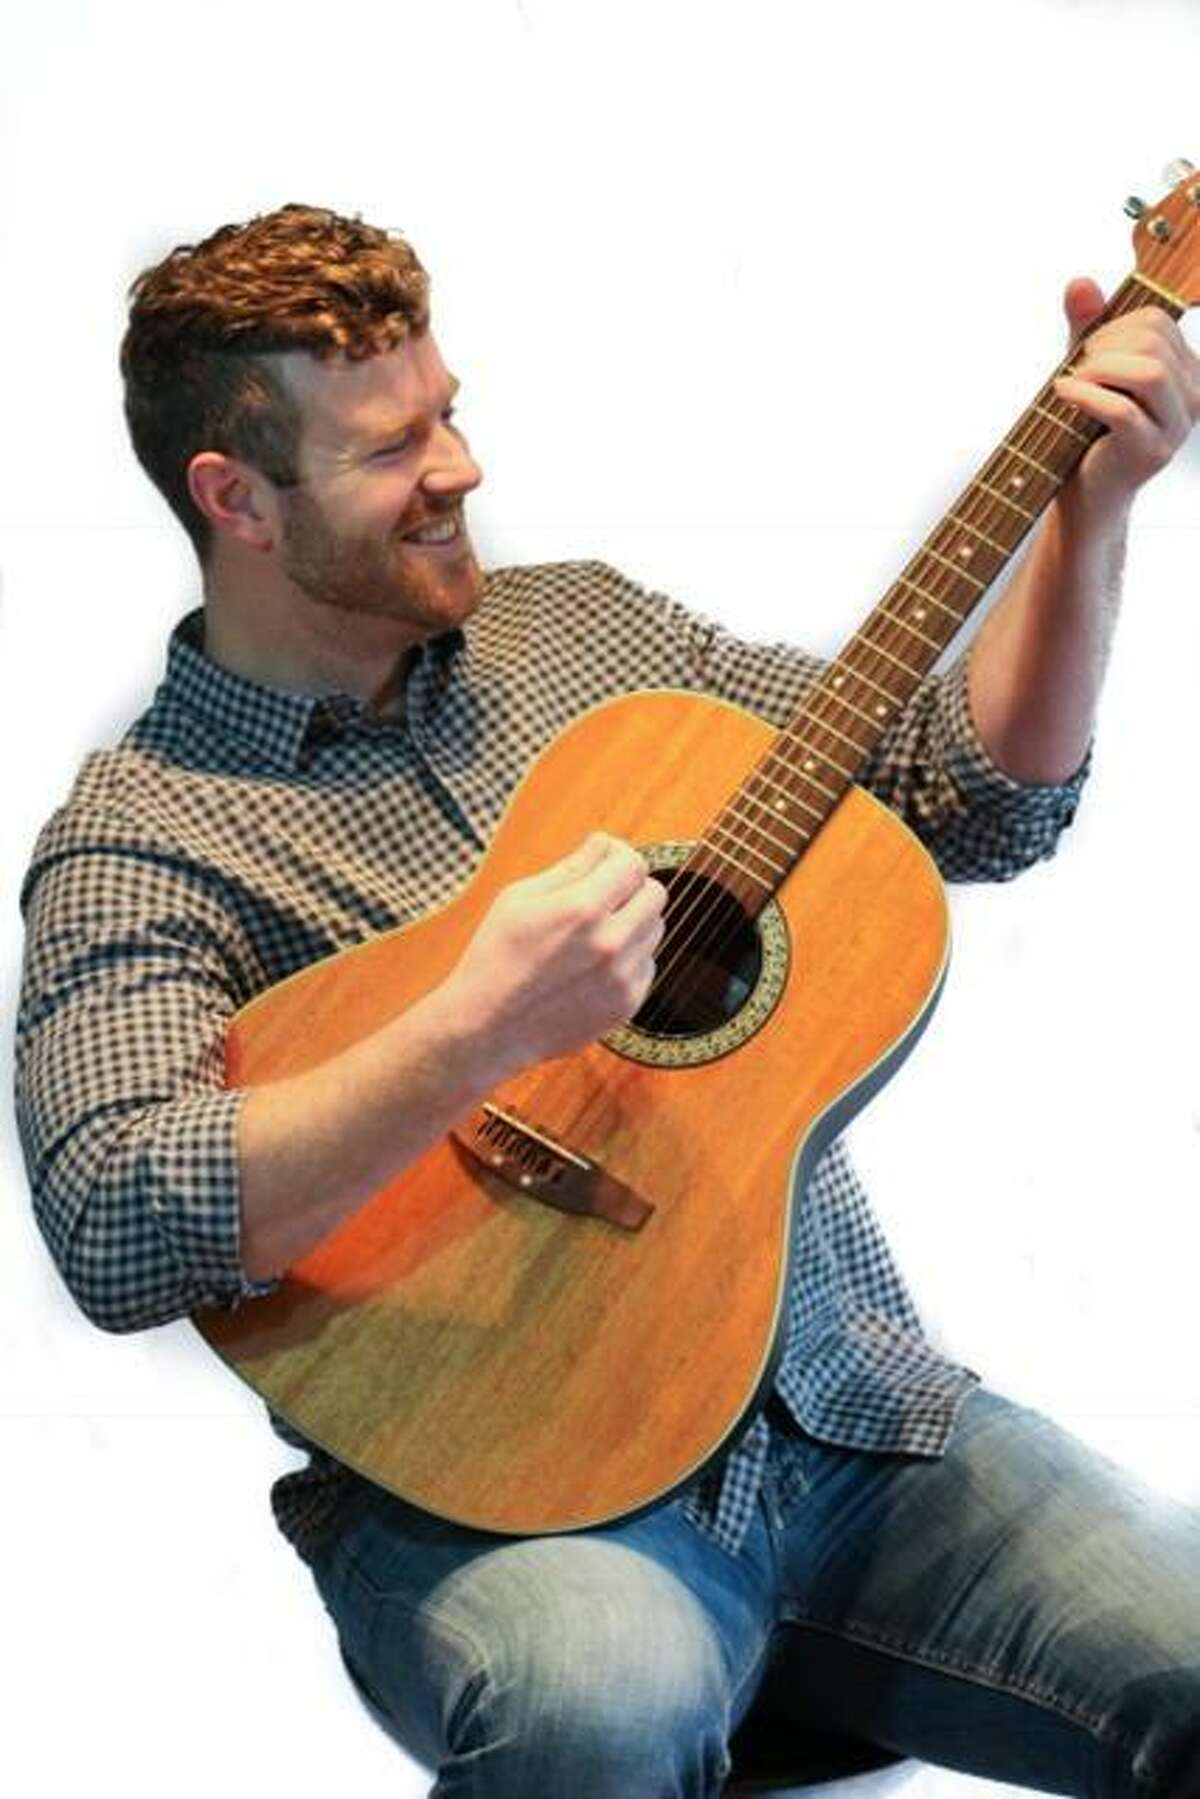 James McCoy Taylor was a Katy football star before he became a contestant on “The Bachelorette.” He will perform on April 12 at Central Green Park, 23501 Cinco Ranch Blvd. in Katy. The free concert will begin at 7 p.m. He has had a Top 100 Country single, and just released his first full-length album.